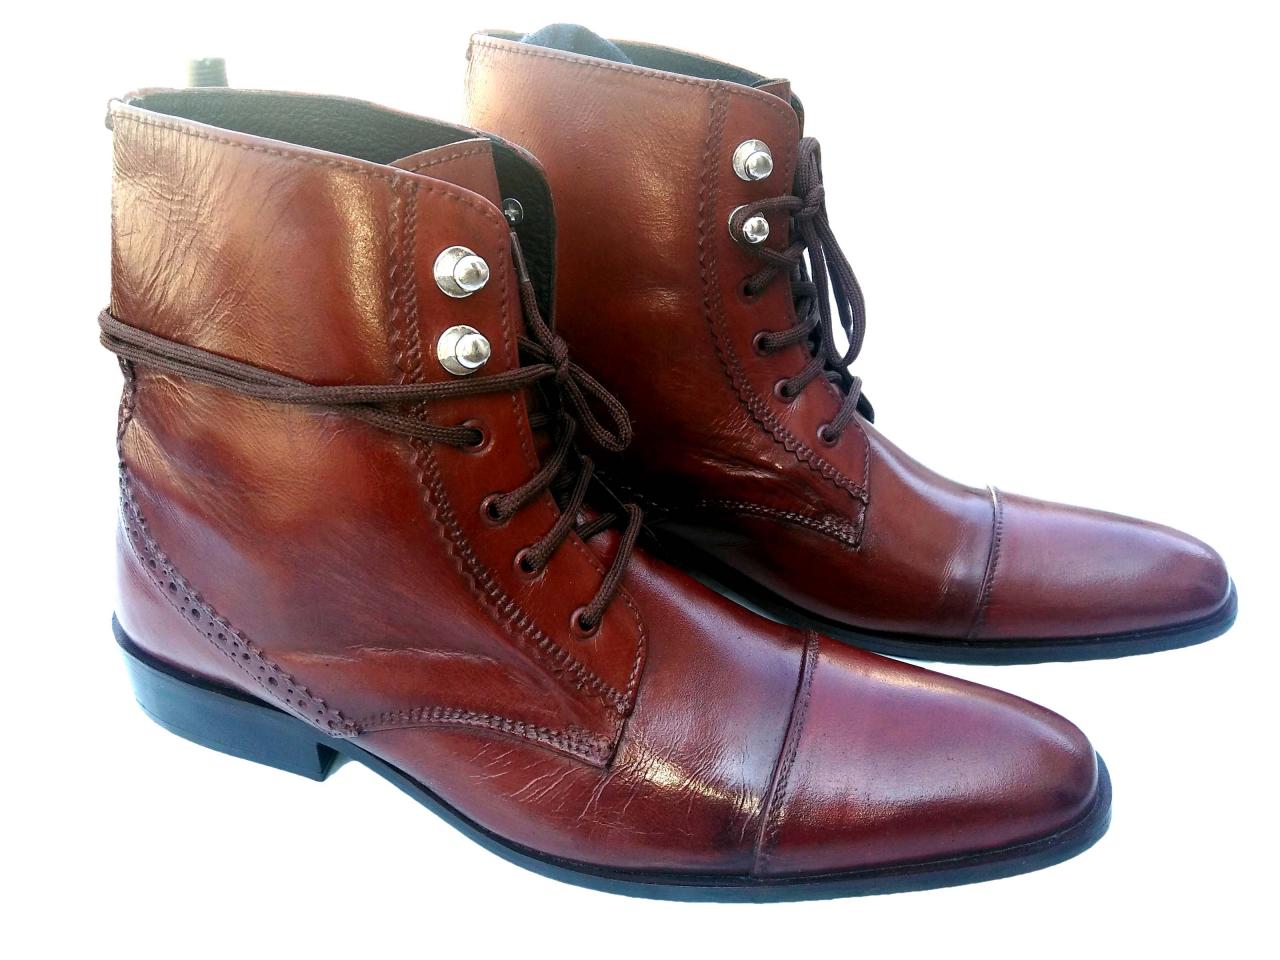 HANDMADE MEN'S BROWN LEATHER LACE-UP BOOTS, ANKLE HIGH MENS LEATHER